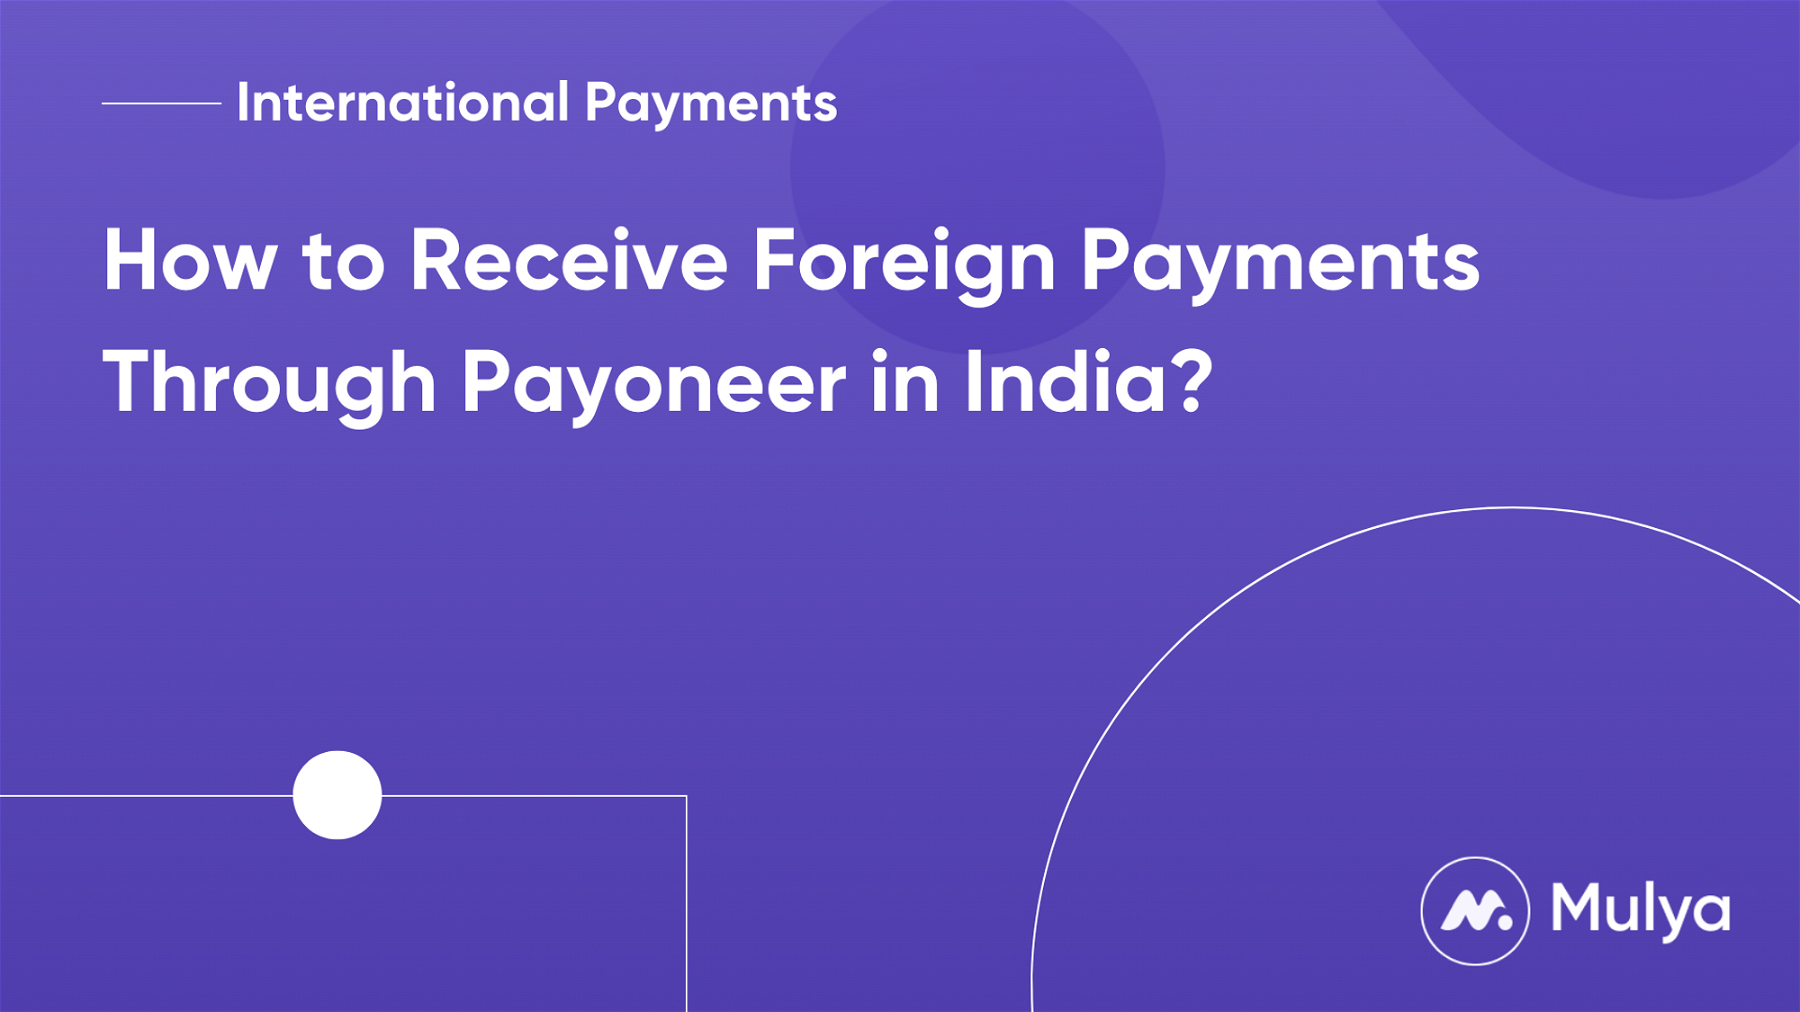 How to Receive Foreign Payments Through Payoneer in India?